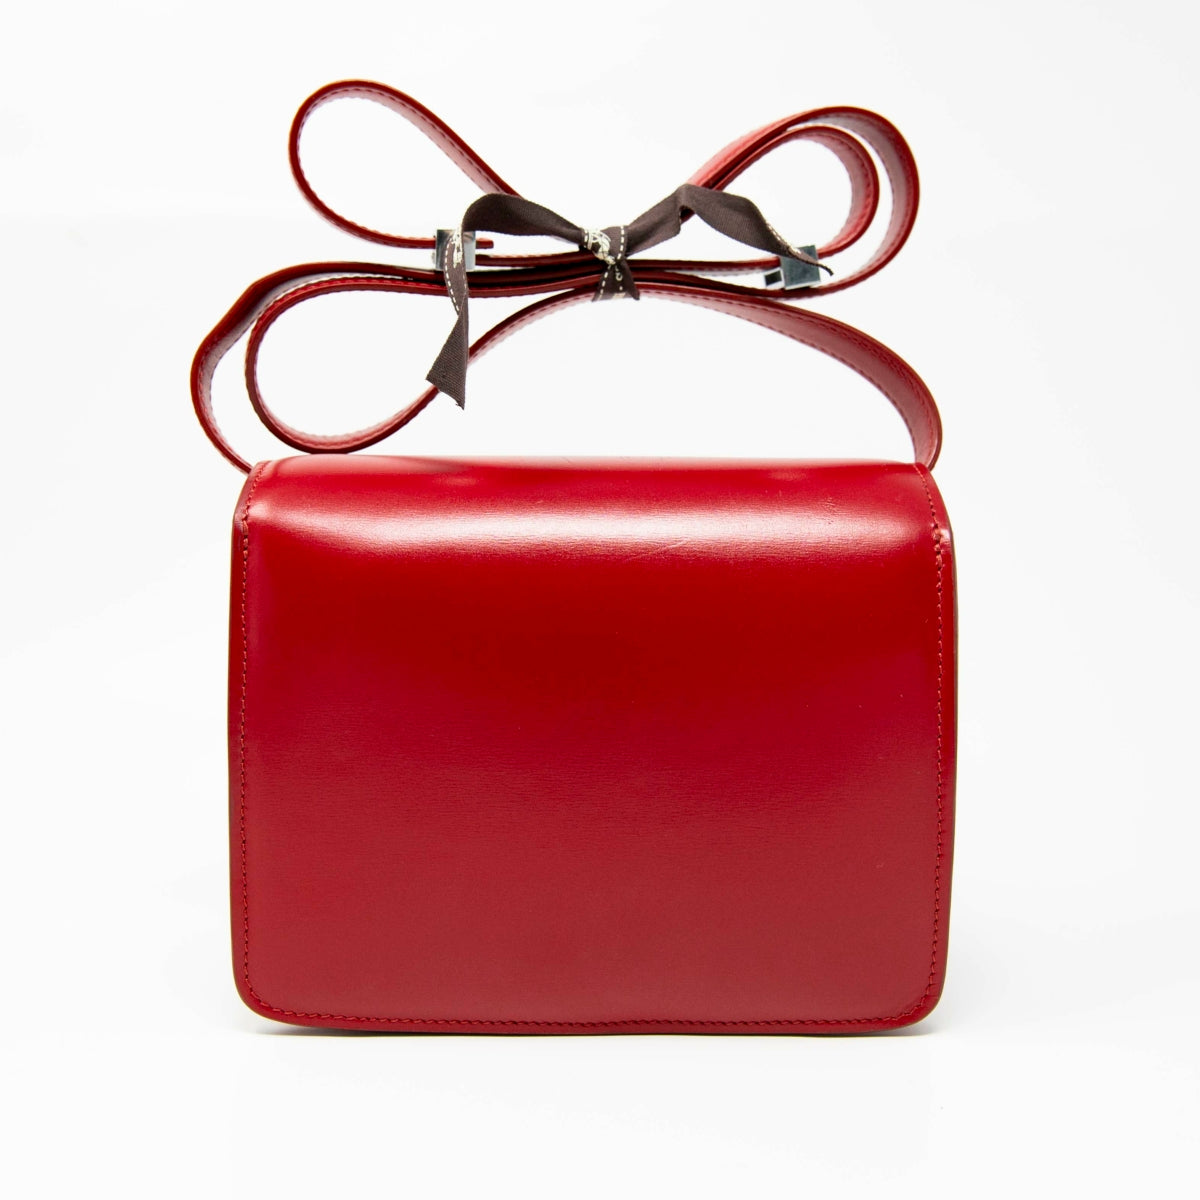 Celine Red Small Box Bag